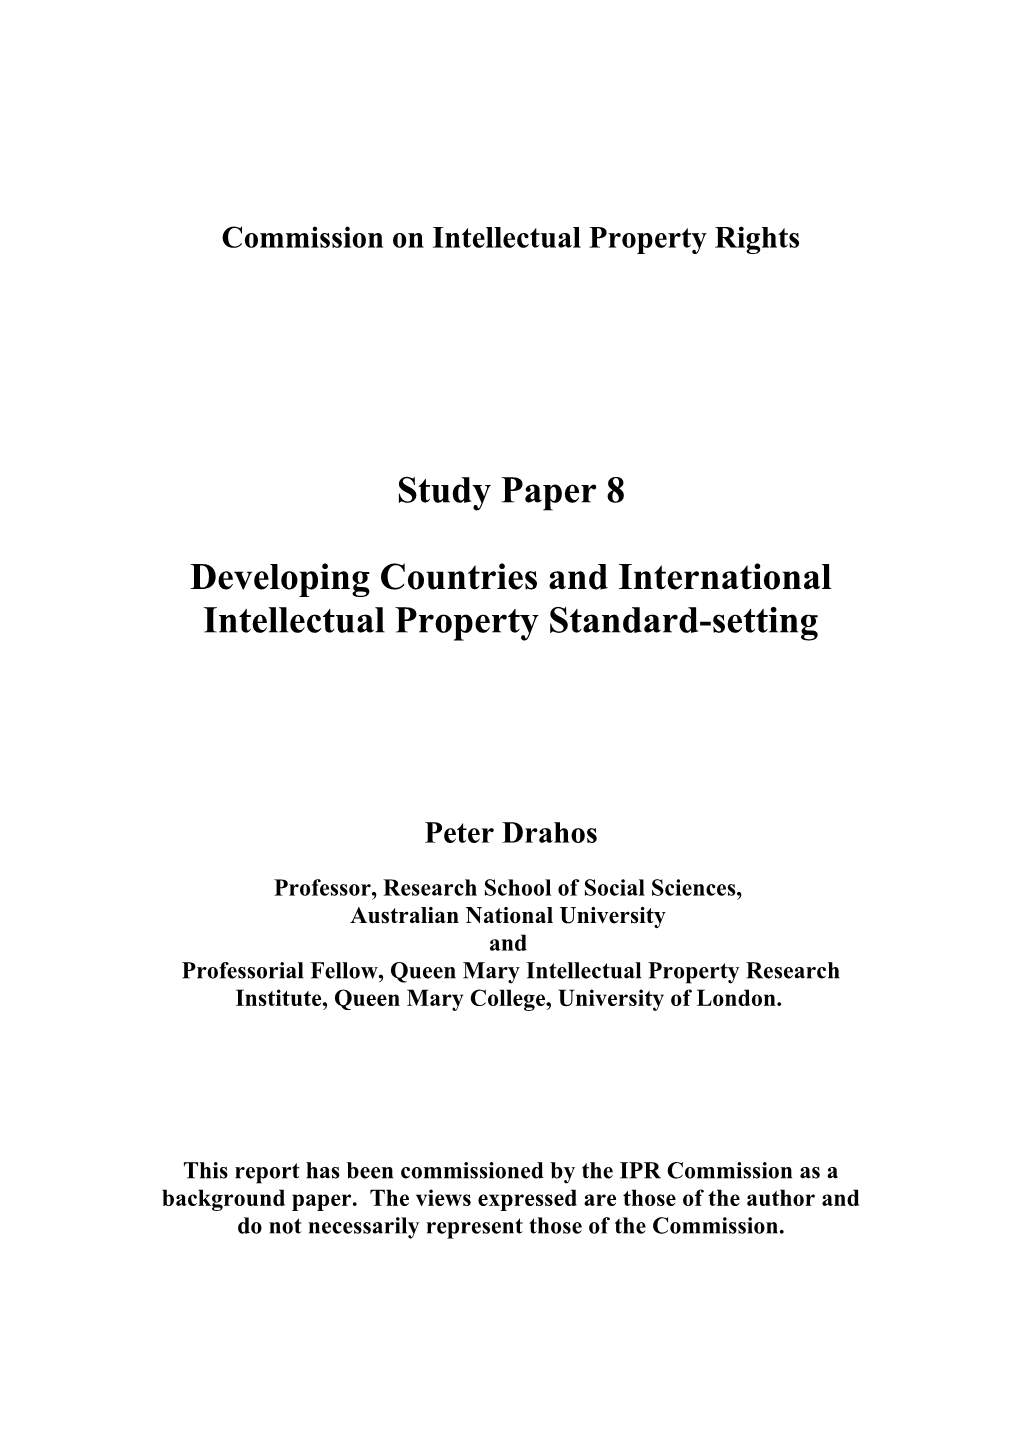 Developing Countries and International Intellectual Property Standard Setting: Towards